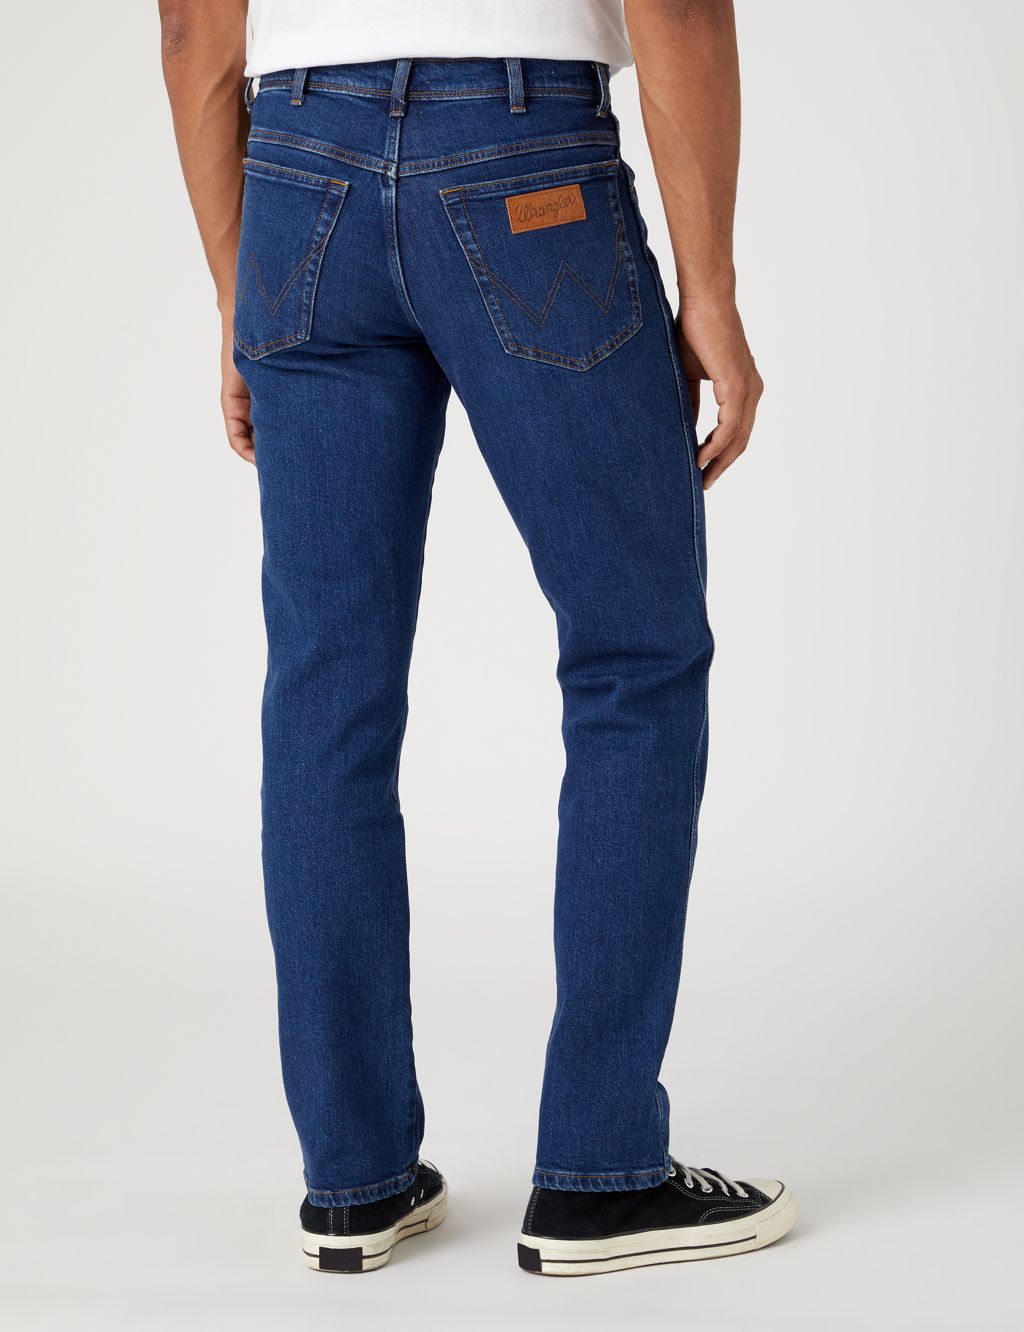 Texas Authentic Straight Fit 5 Pocket Jeans image 3